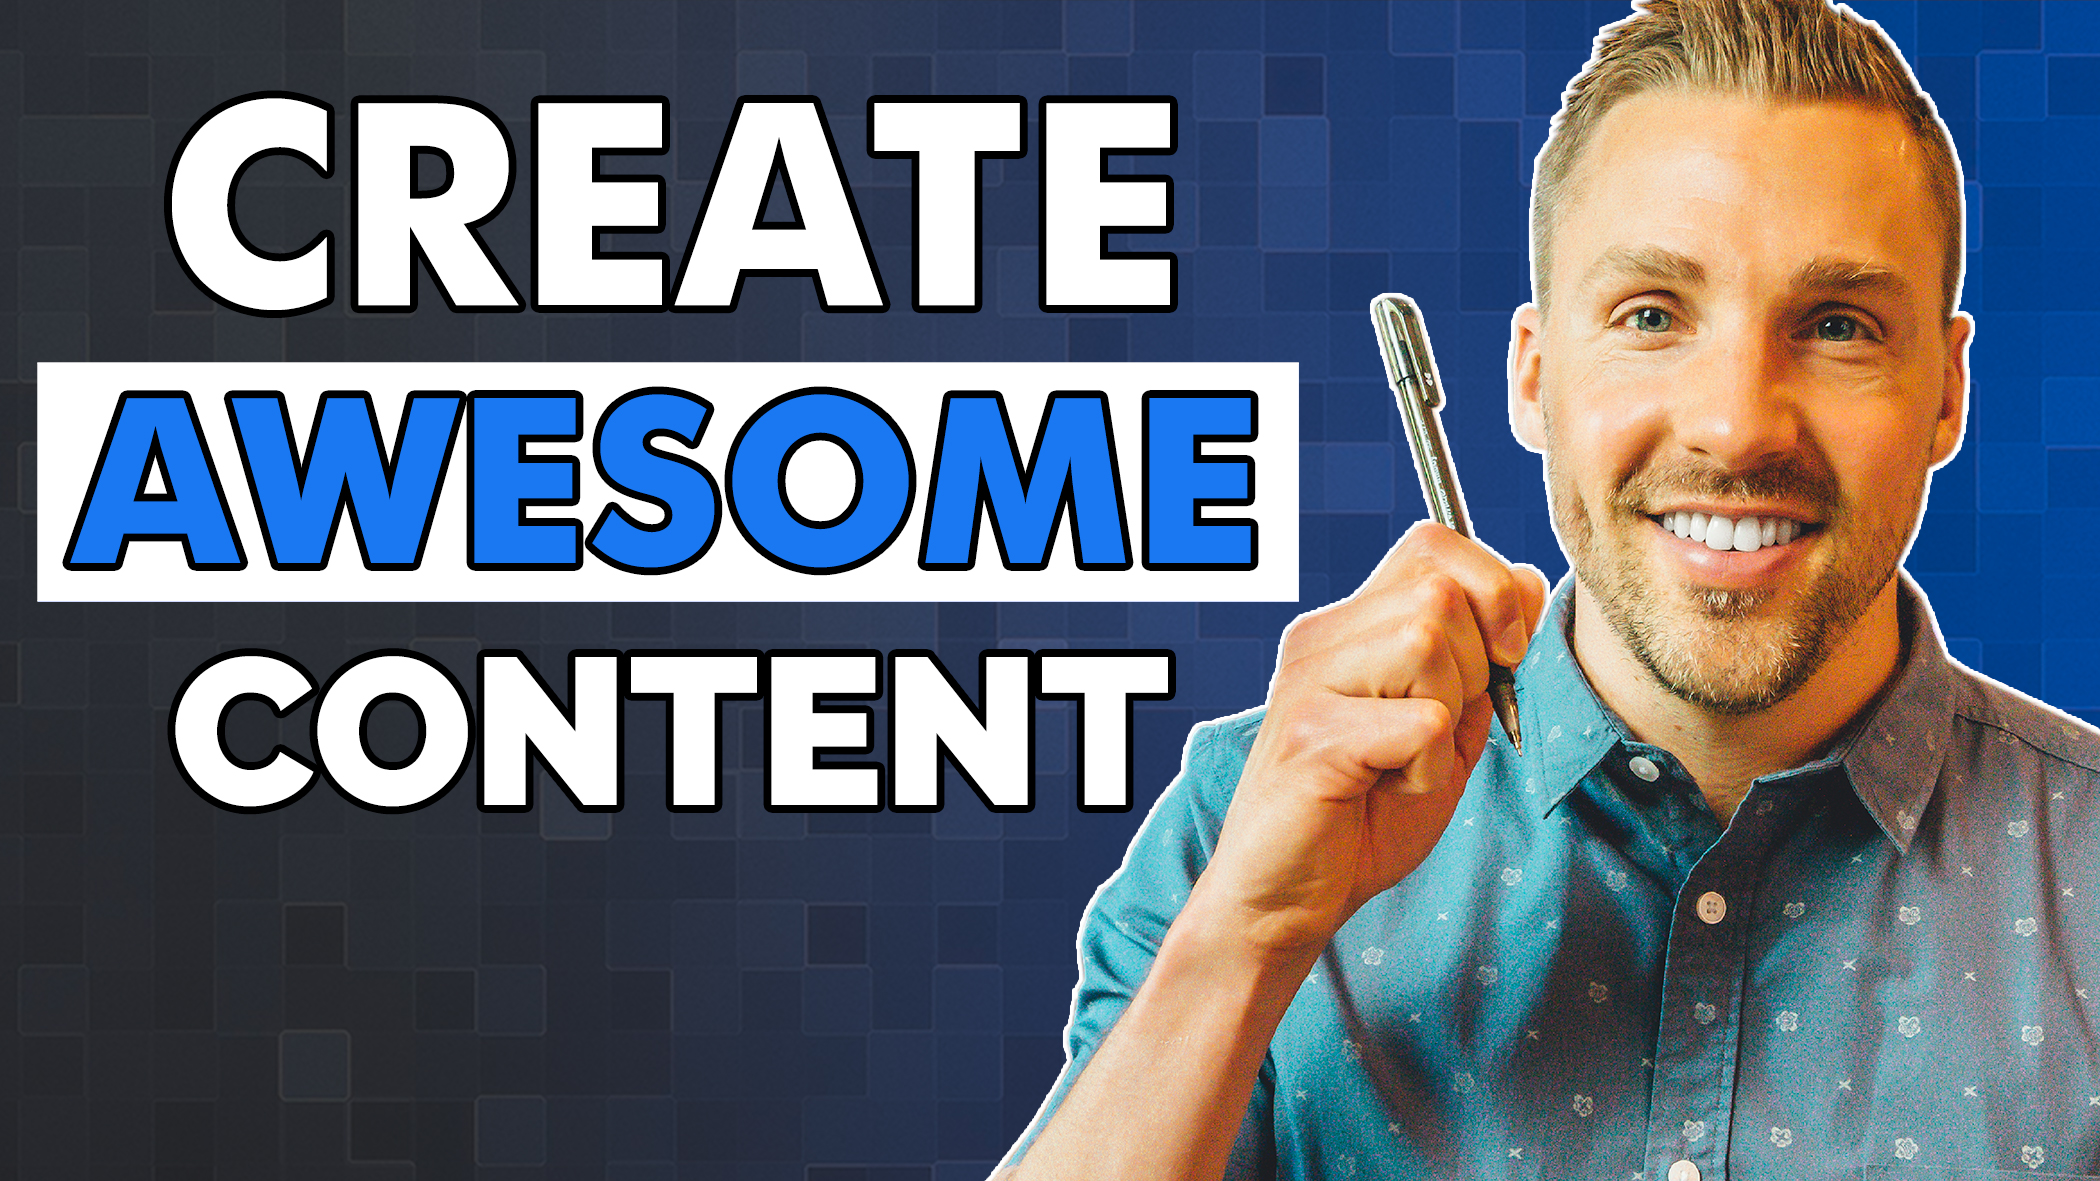 How To Write Great Content | Content Marketing For Your Blog, Website, Or Ads (2019)